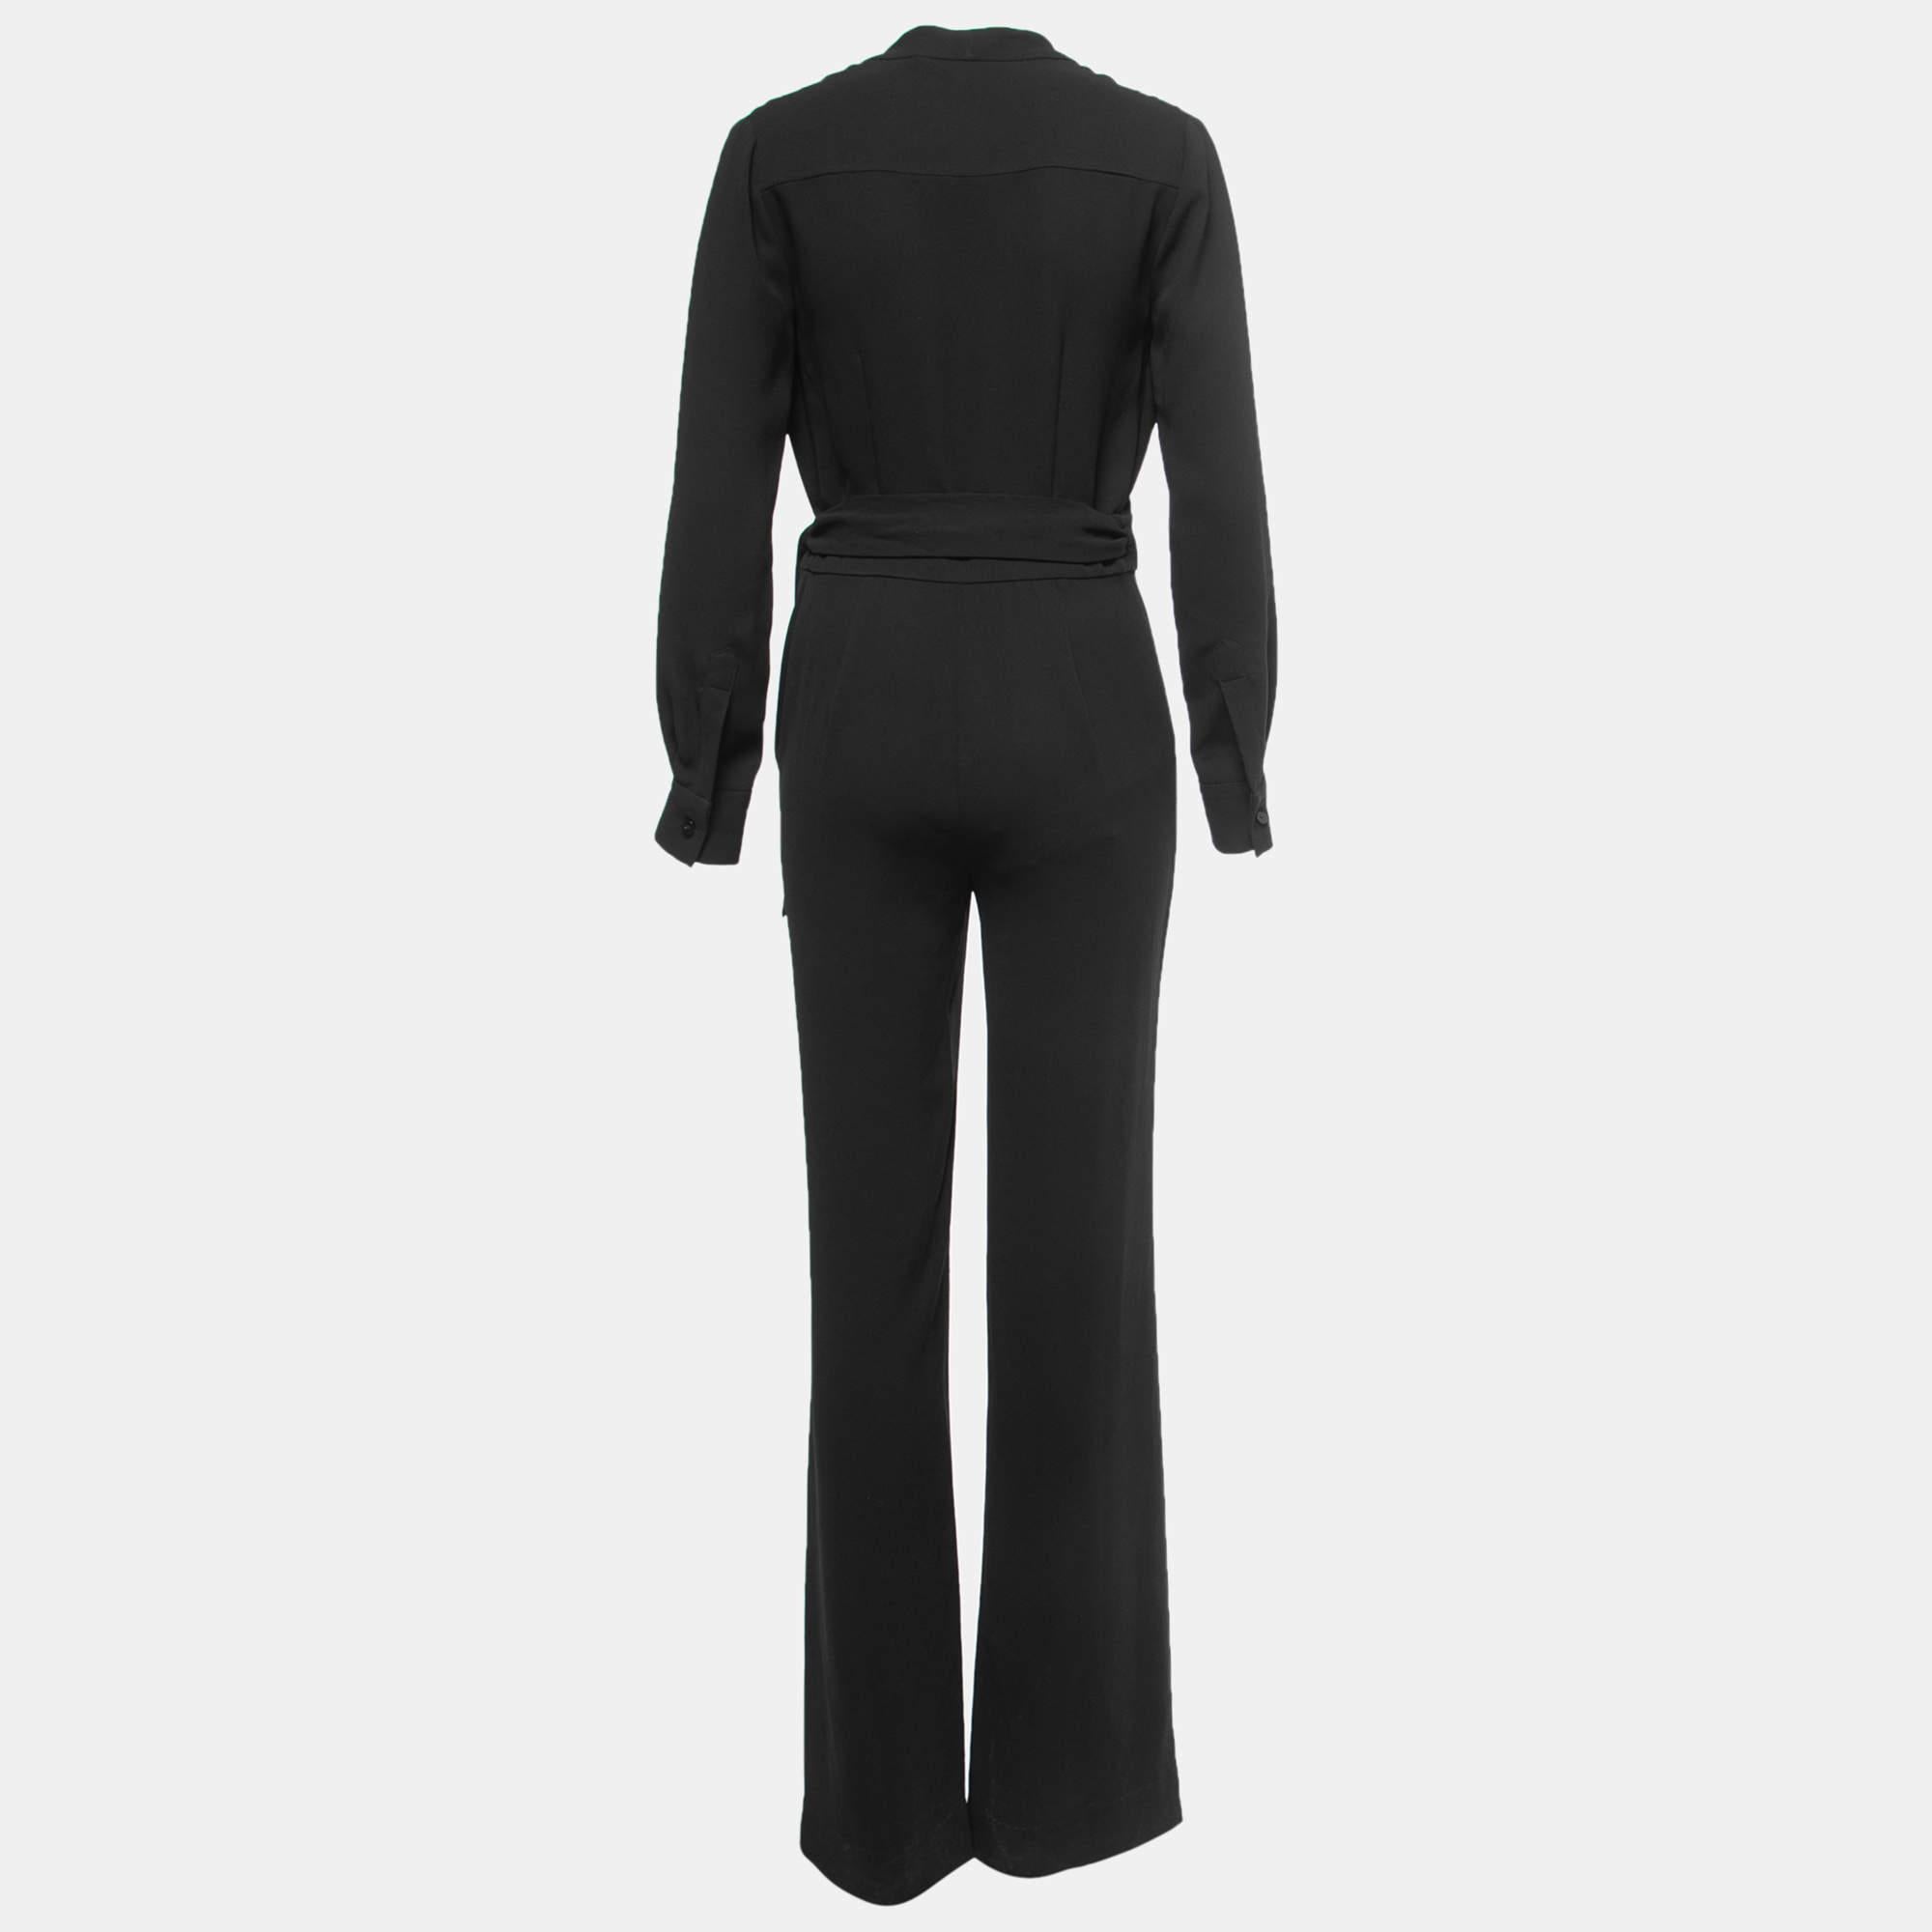 Bring in a touch of sophistication and elegance to your look by wearing this jumpsuit. A flattering neckline, classy hue, and noticeable details define this jumpsuit. Style it with high heels.

Includes: tag